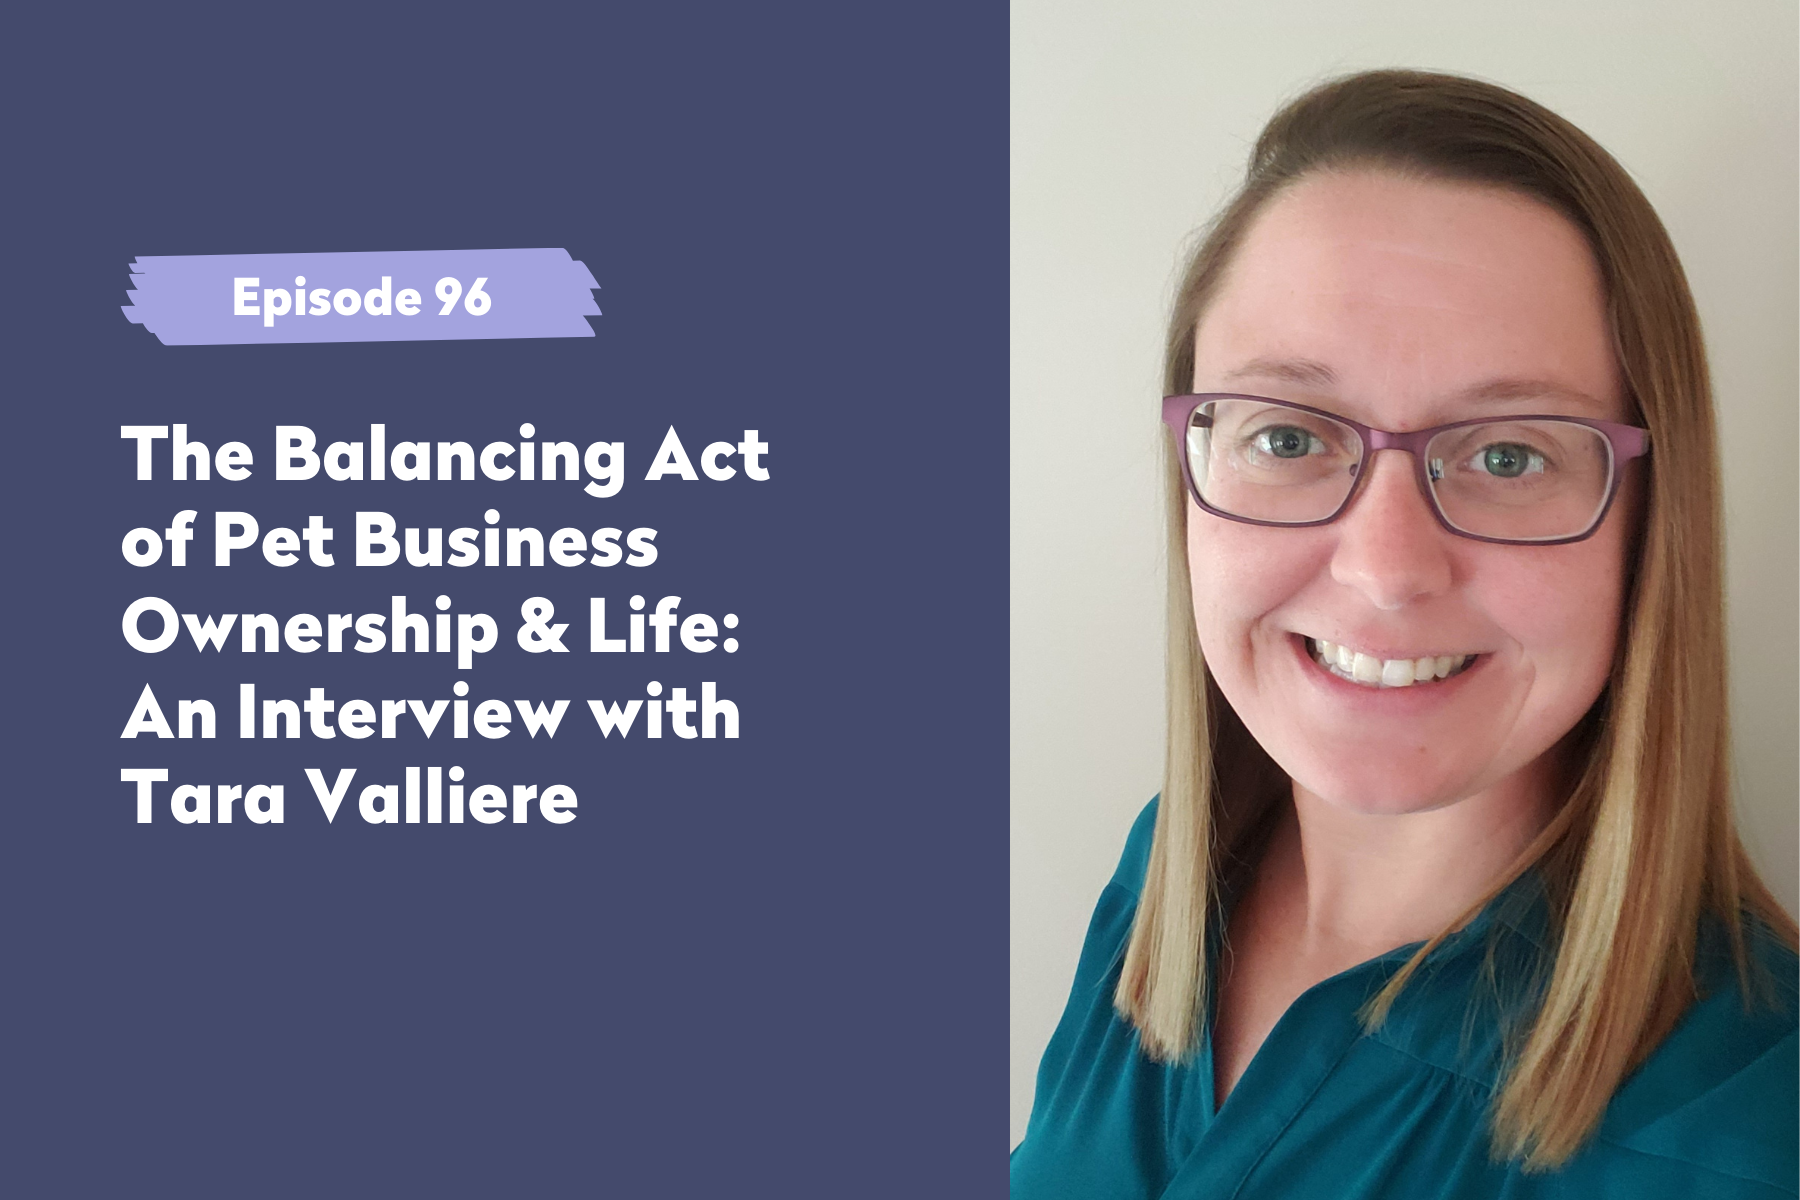 Episode 96 | The Balancing Act of Pet Business Ownership & Life: An Interview with Tara Valliere